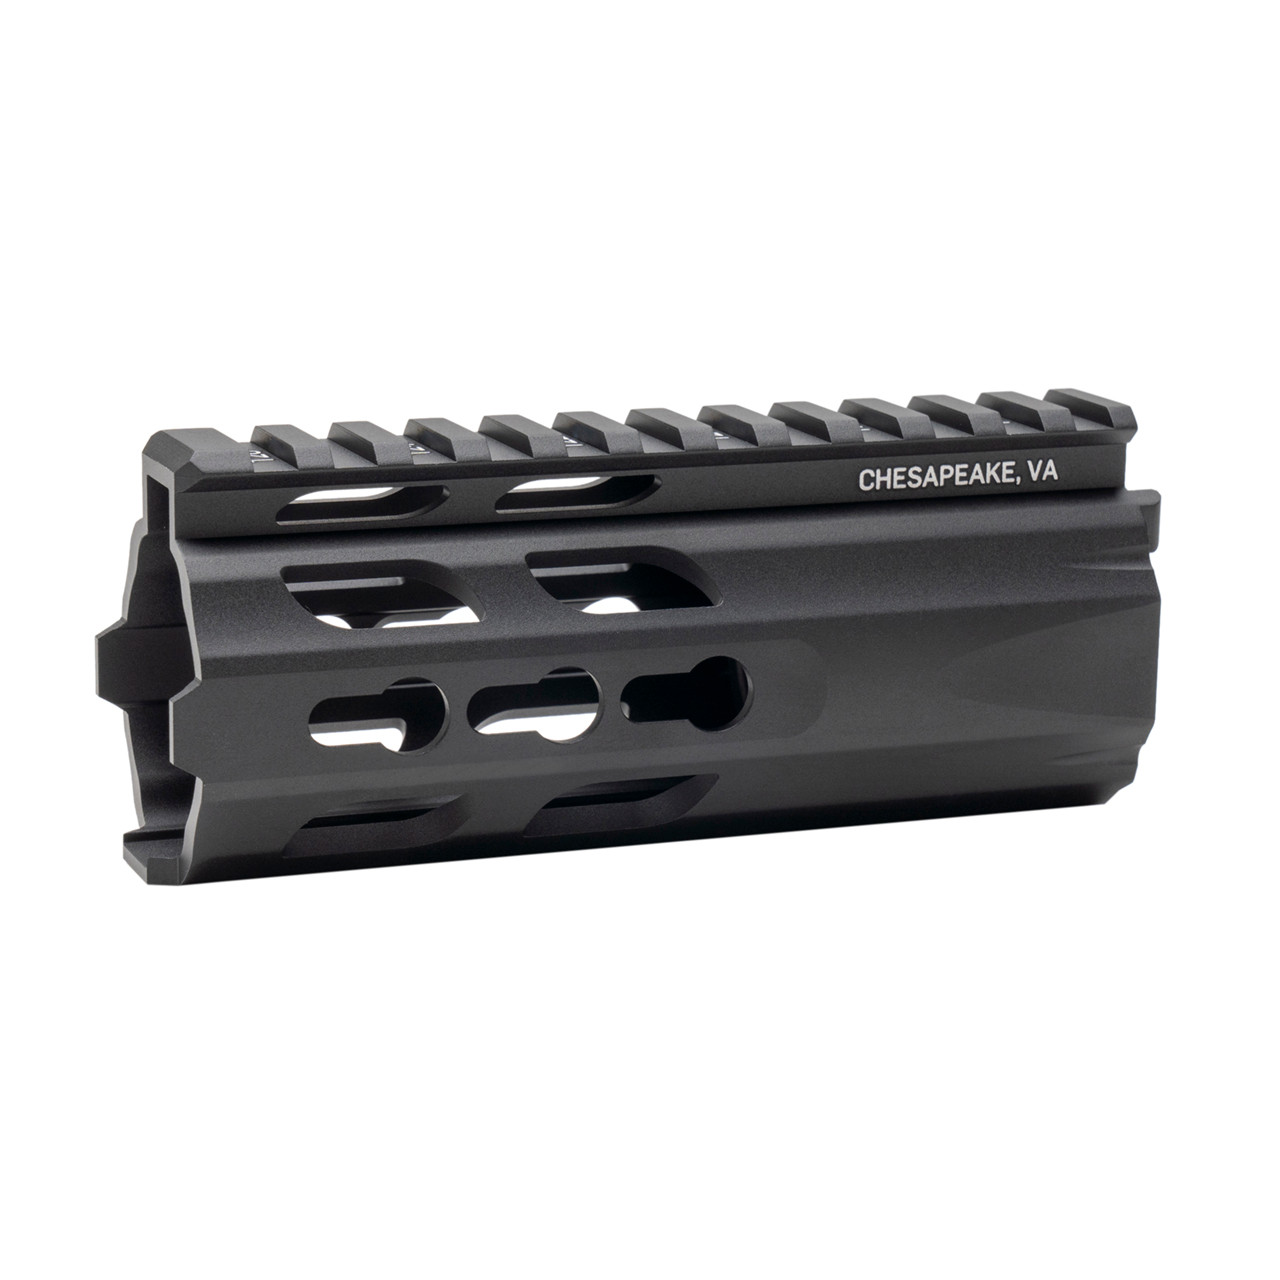 Shop Trident TR105 Keymod Rail Assembly / Black - $ 89 - Krytac.com | For Airsoft Use Only.